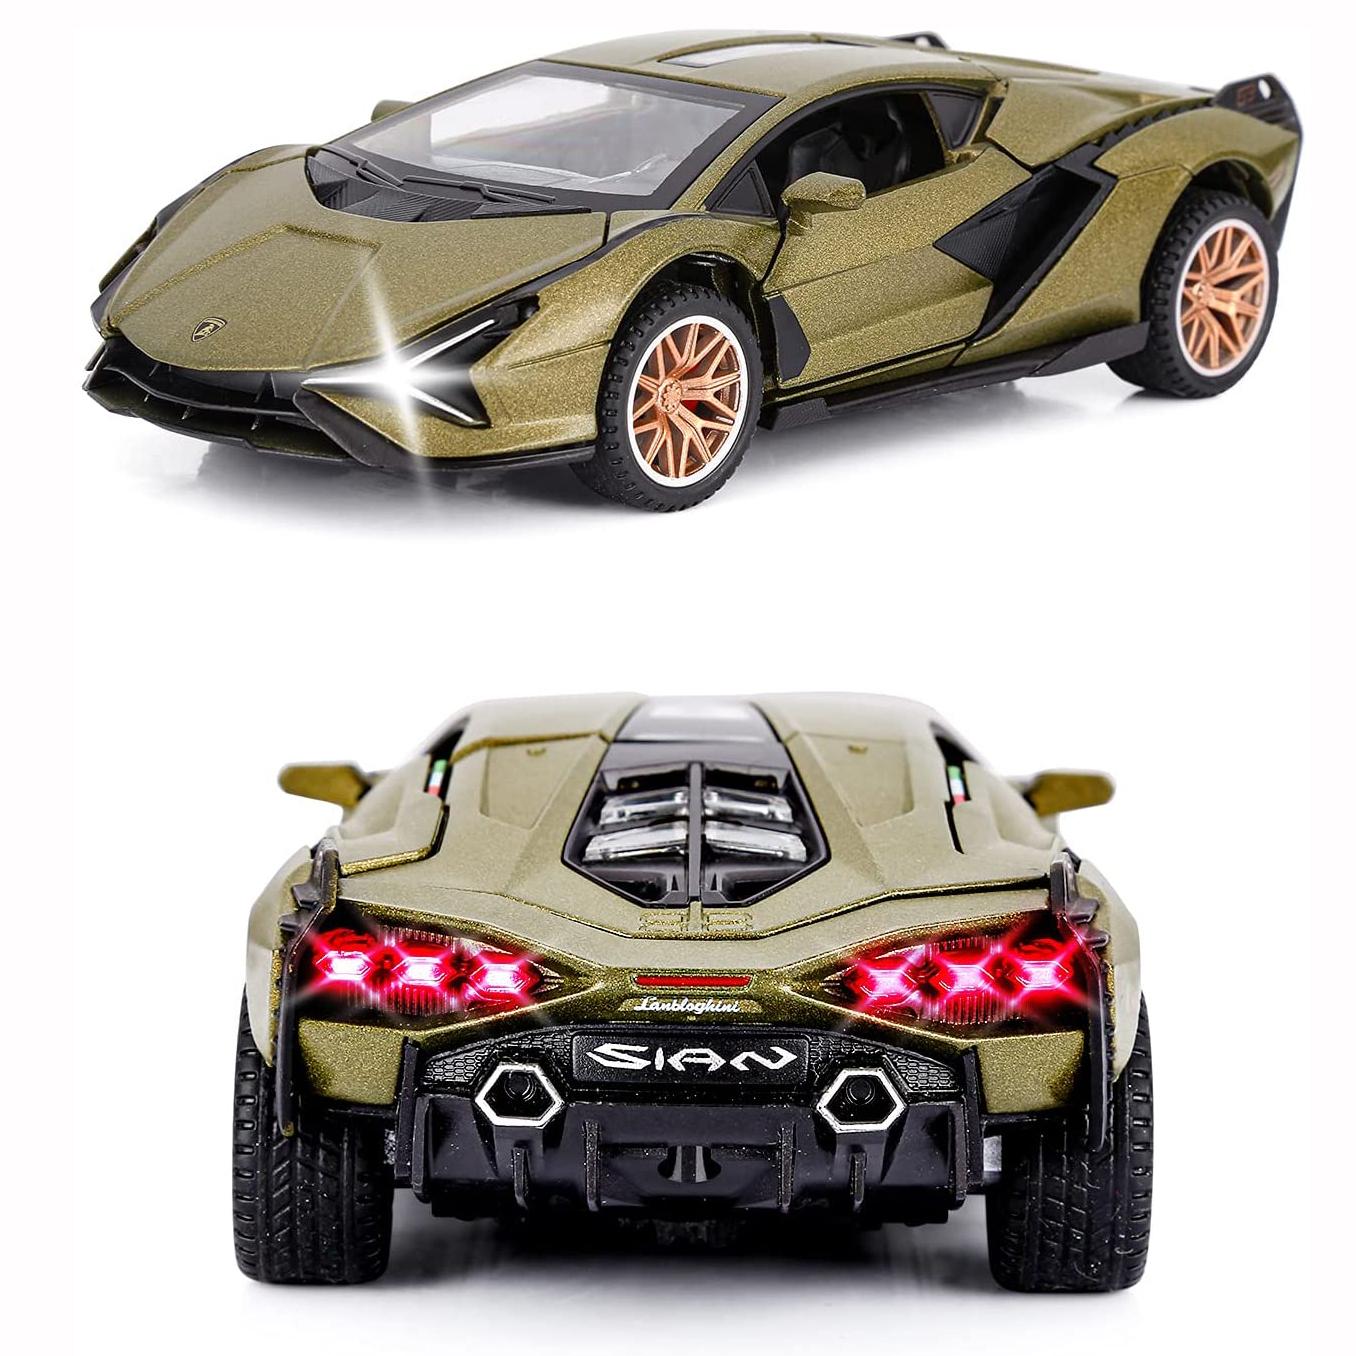 Thriving-Car Models & Action Figures 1:32 Scale Toy Cars Sian FKP3 Metal Model Car with Light and Sound Pull Back Toy Car for Boys Age 3 + Year Old